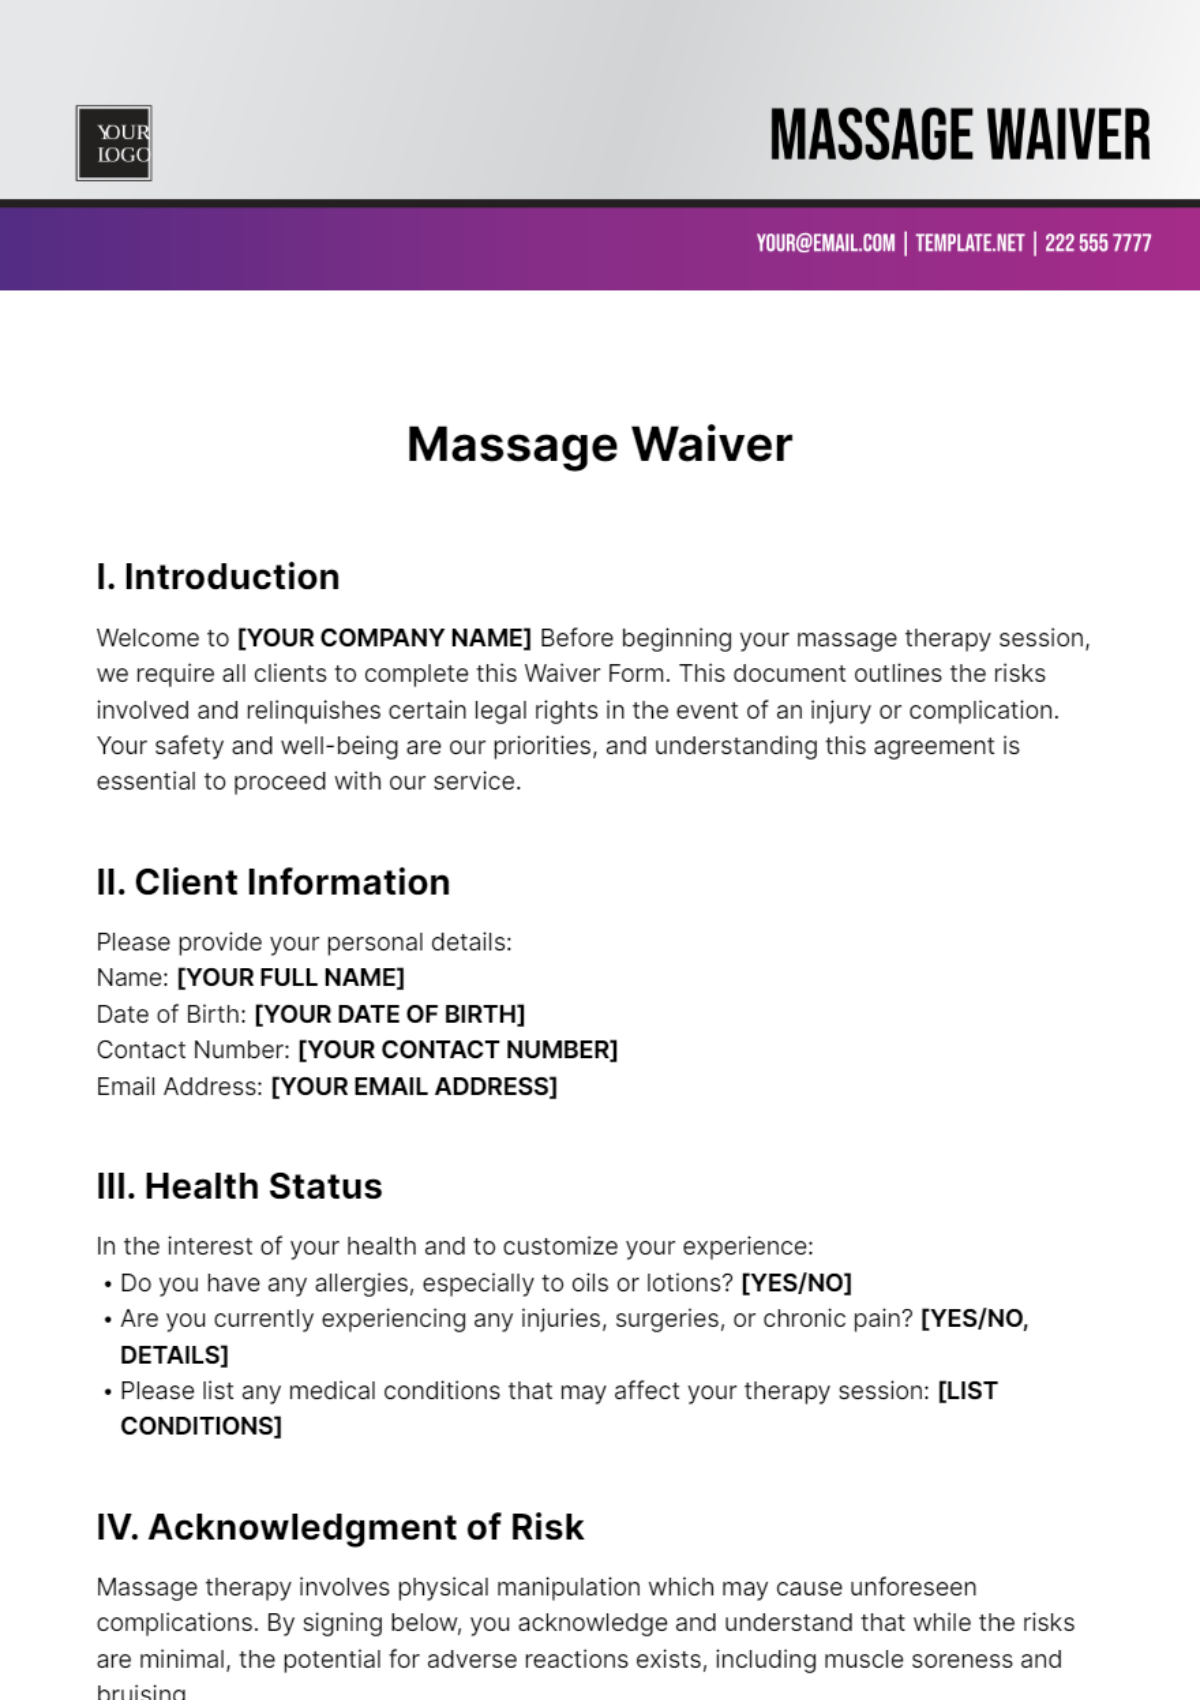 Massage Waiver Template